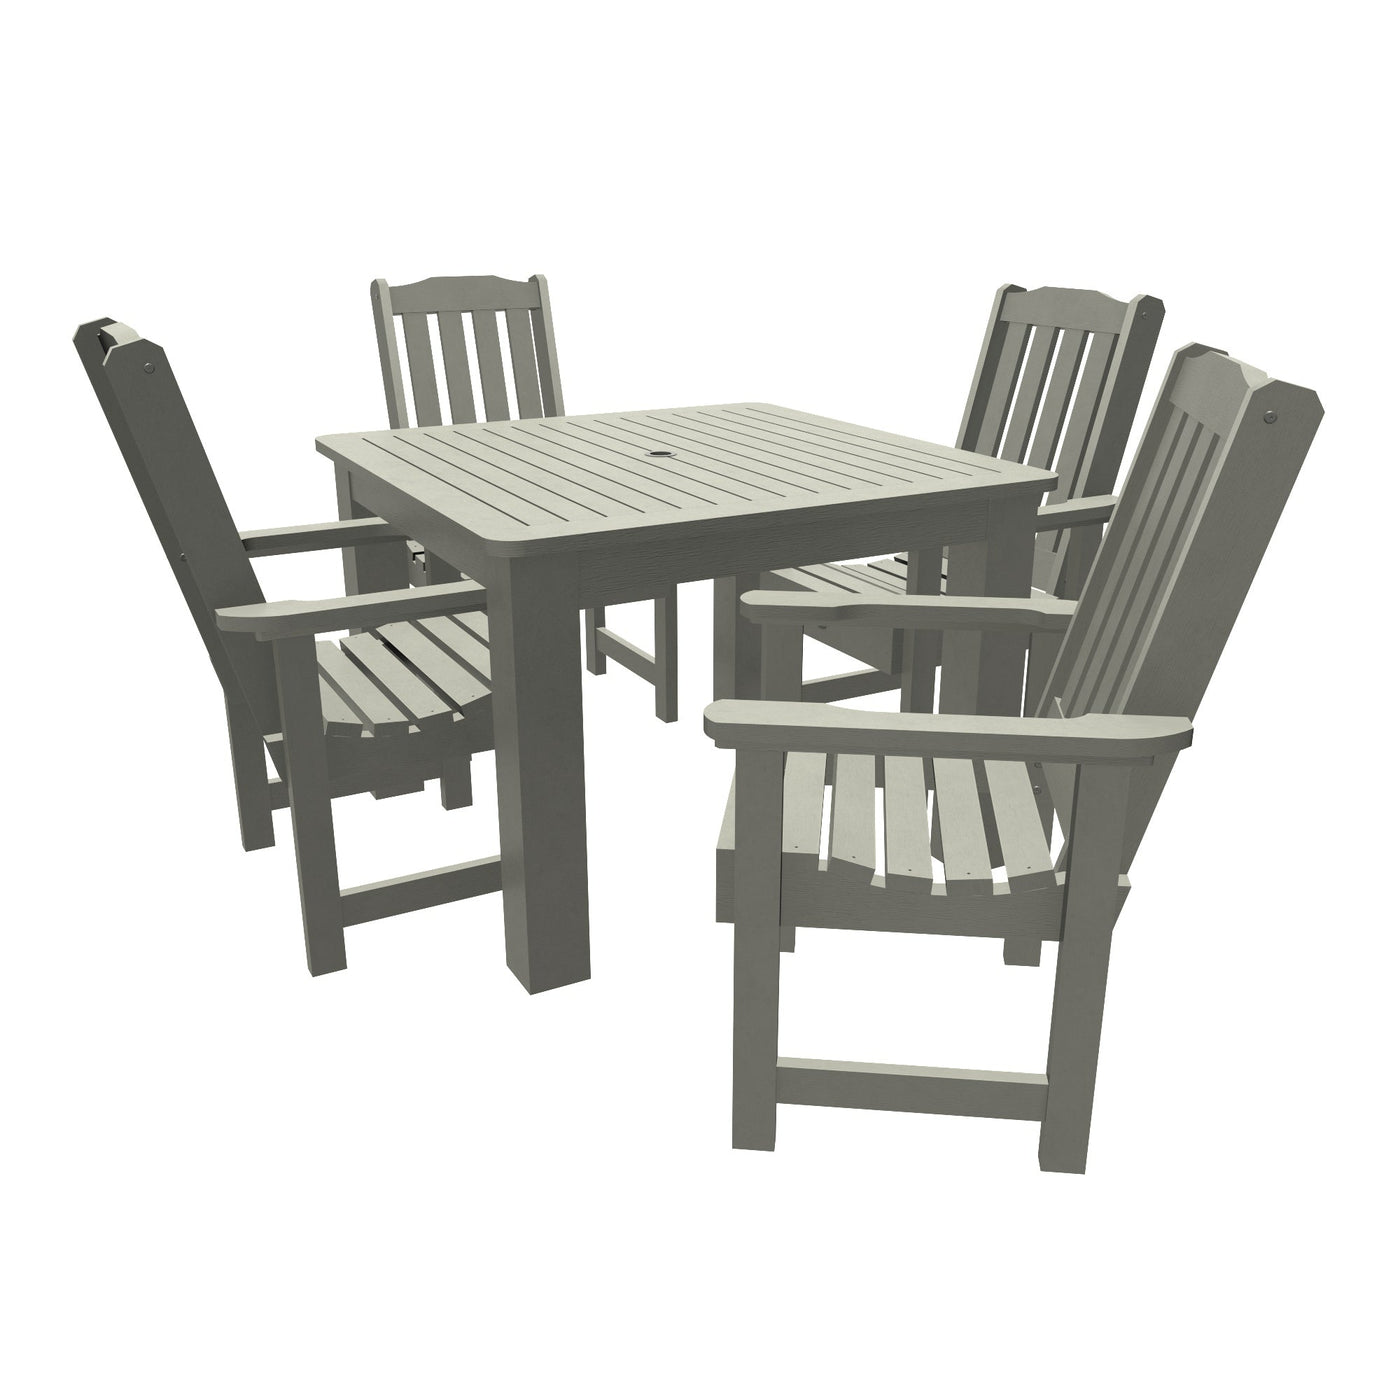 Lehigh 5pc Square Dining Set 42in x 42in - Dining Height Dining Highwood USA Coastal Teak 